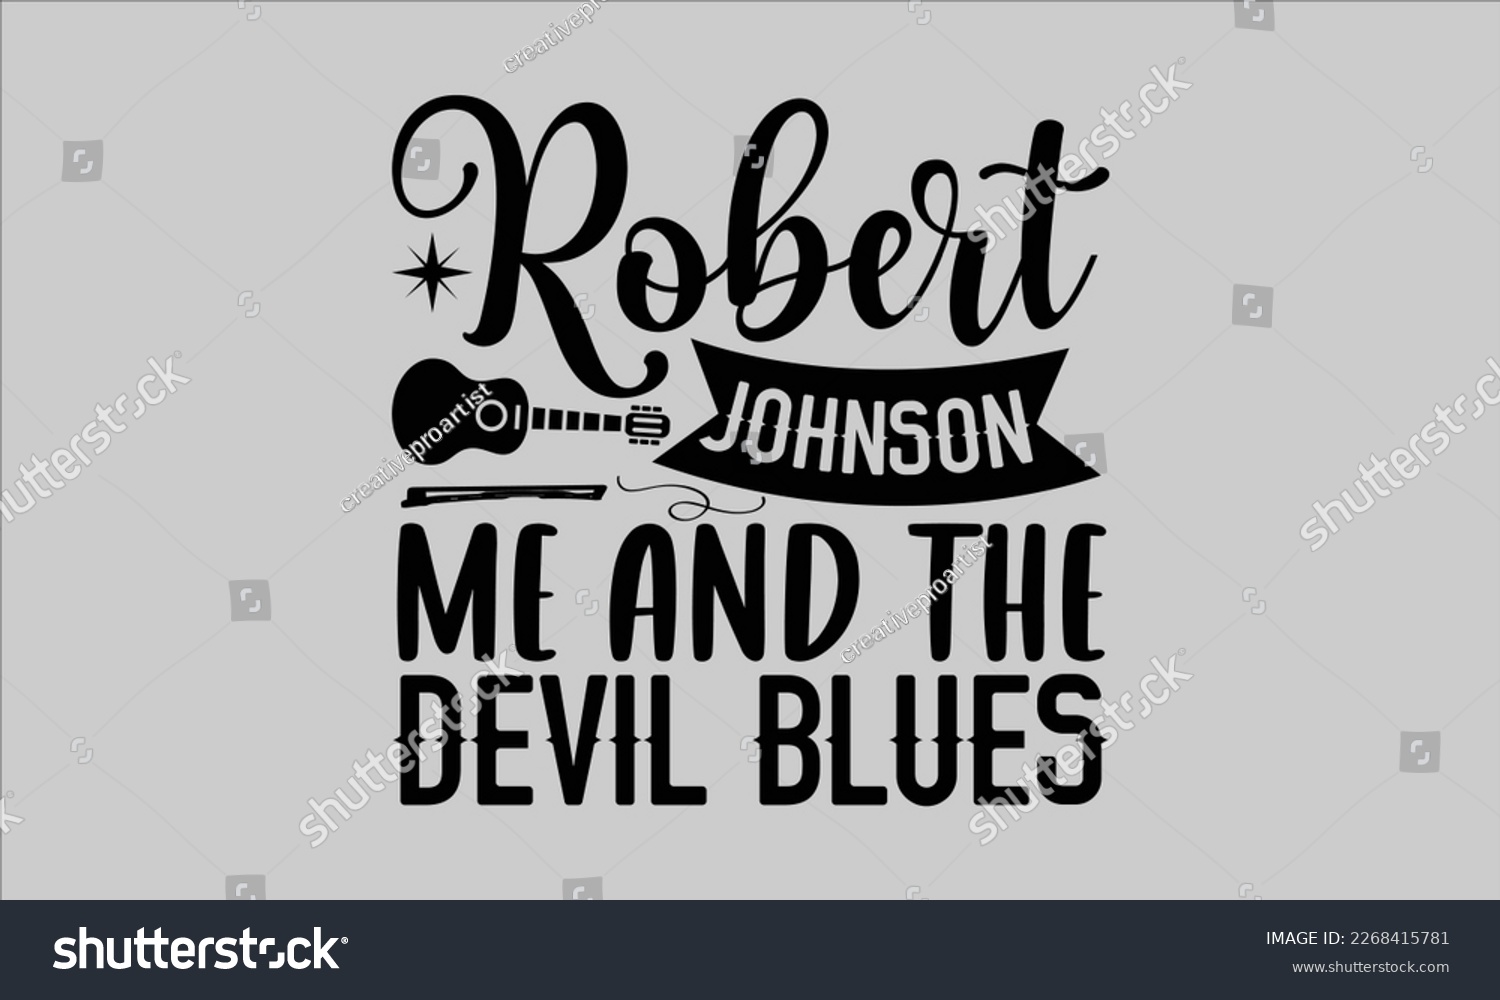 SVG of Robert Johnson me and the devil blues- Piano t- shirt design, Template Vector and Sports illustration, lettering on a white background for svg Cutting Machine, posters mog, bags eps 10. svg